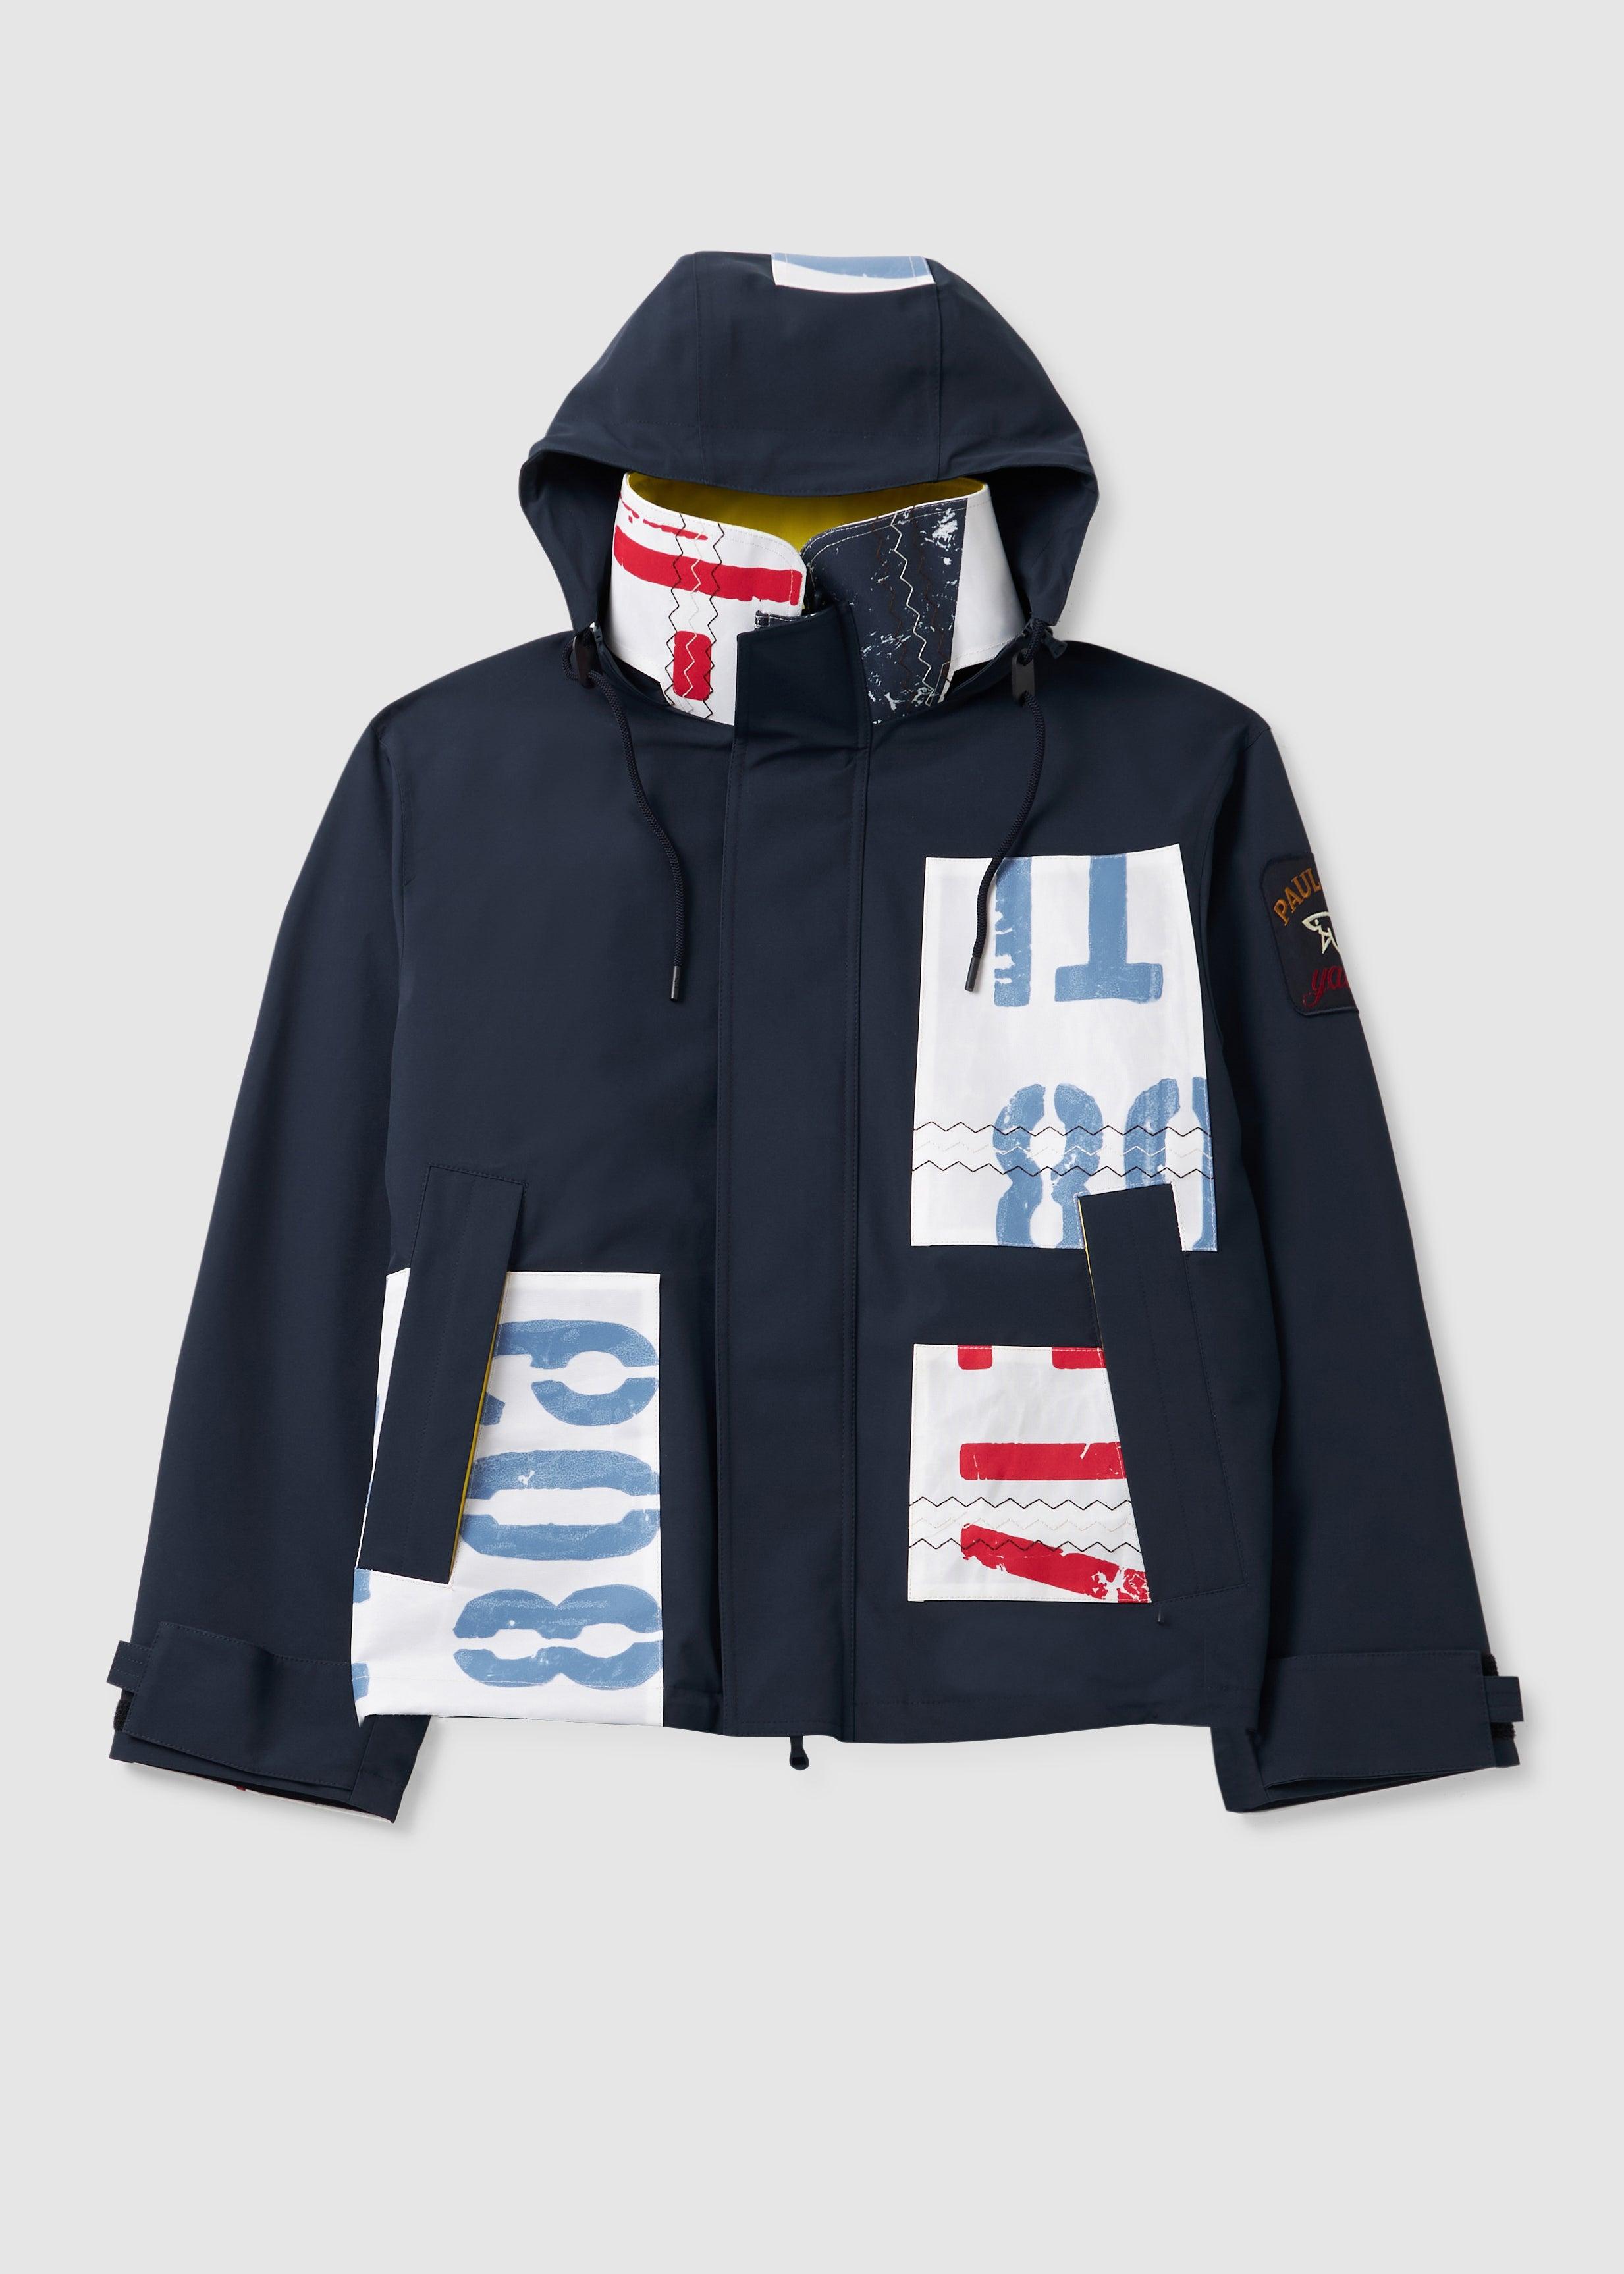 Paul & Shark Sail The City Save The Sea Jacket in Blue for Men | Lyst